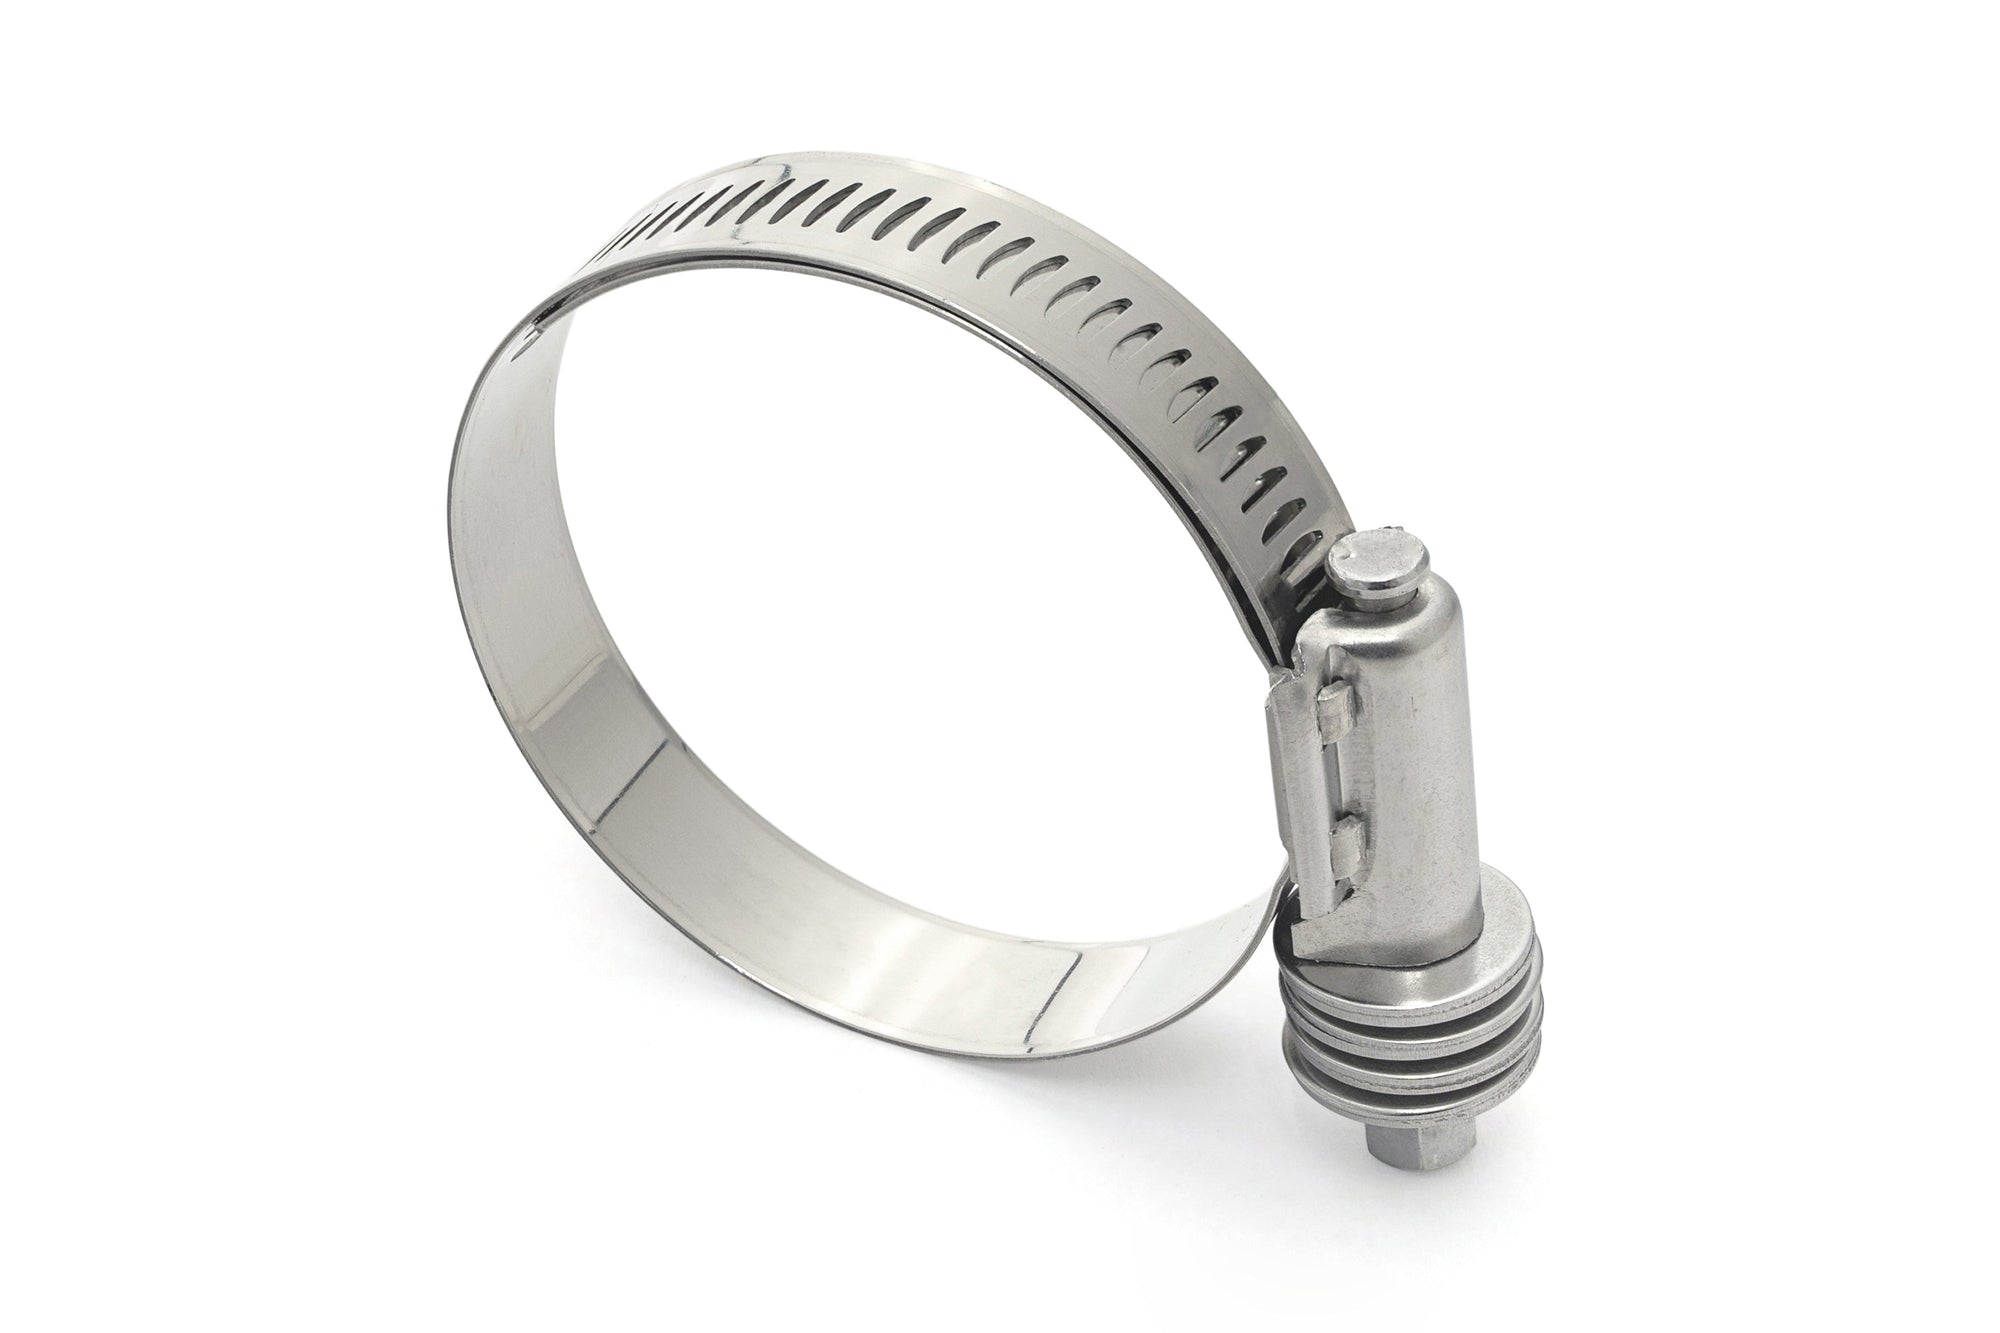 HPS Stainless Steel Constant Torque Hose Clamp CTF-125 11/16 1-1/4 inch 17mm - 32mm Size # 12